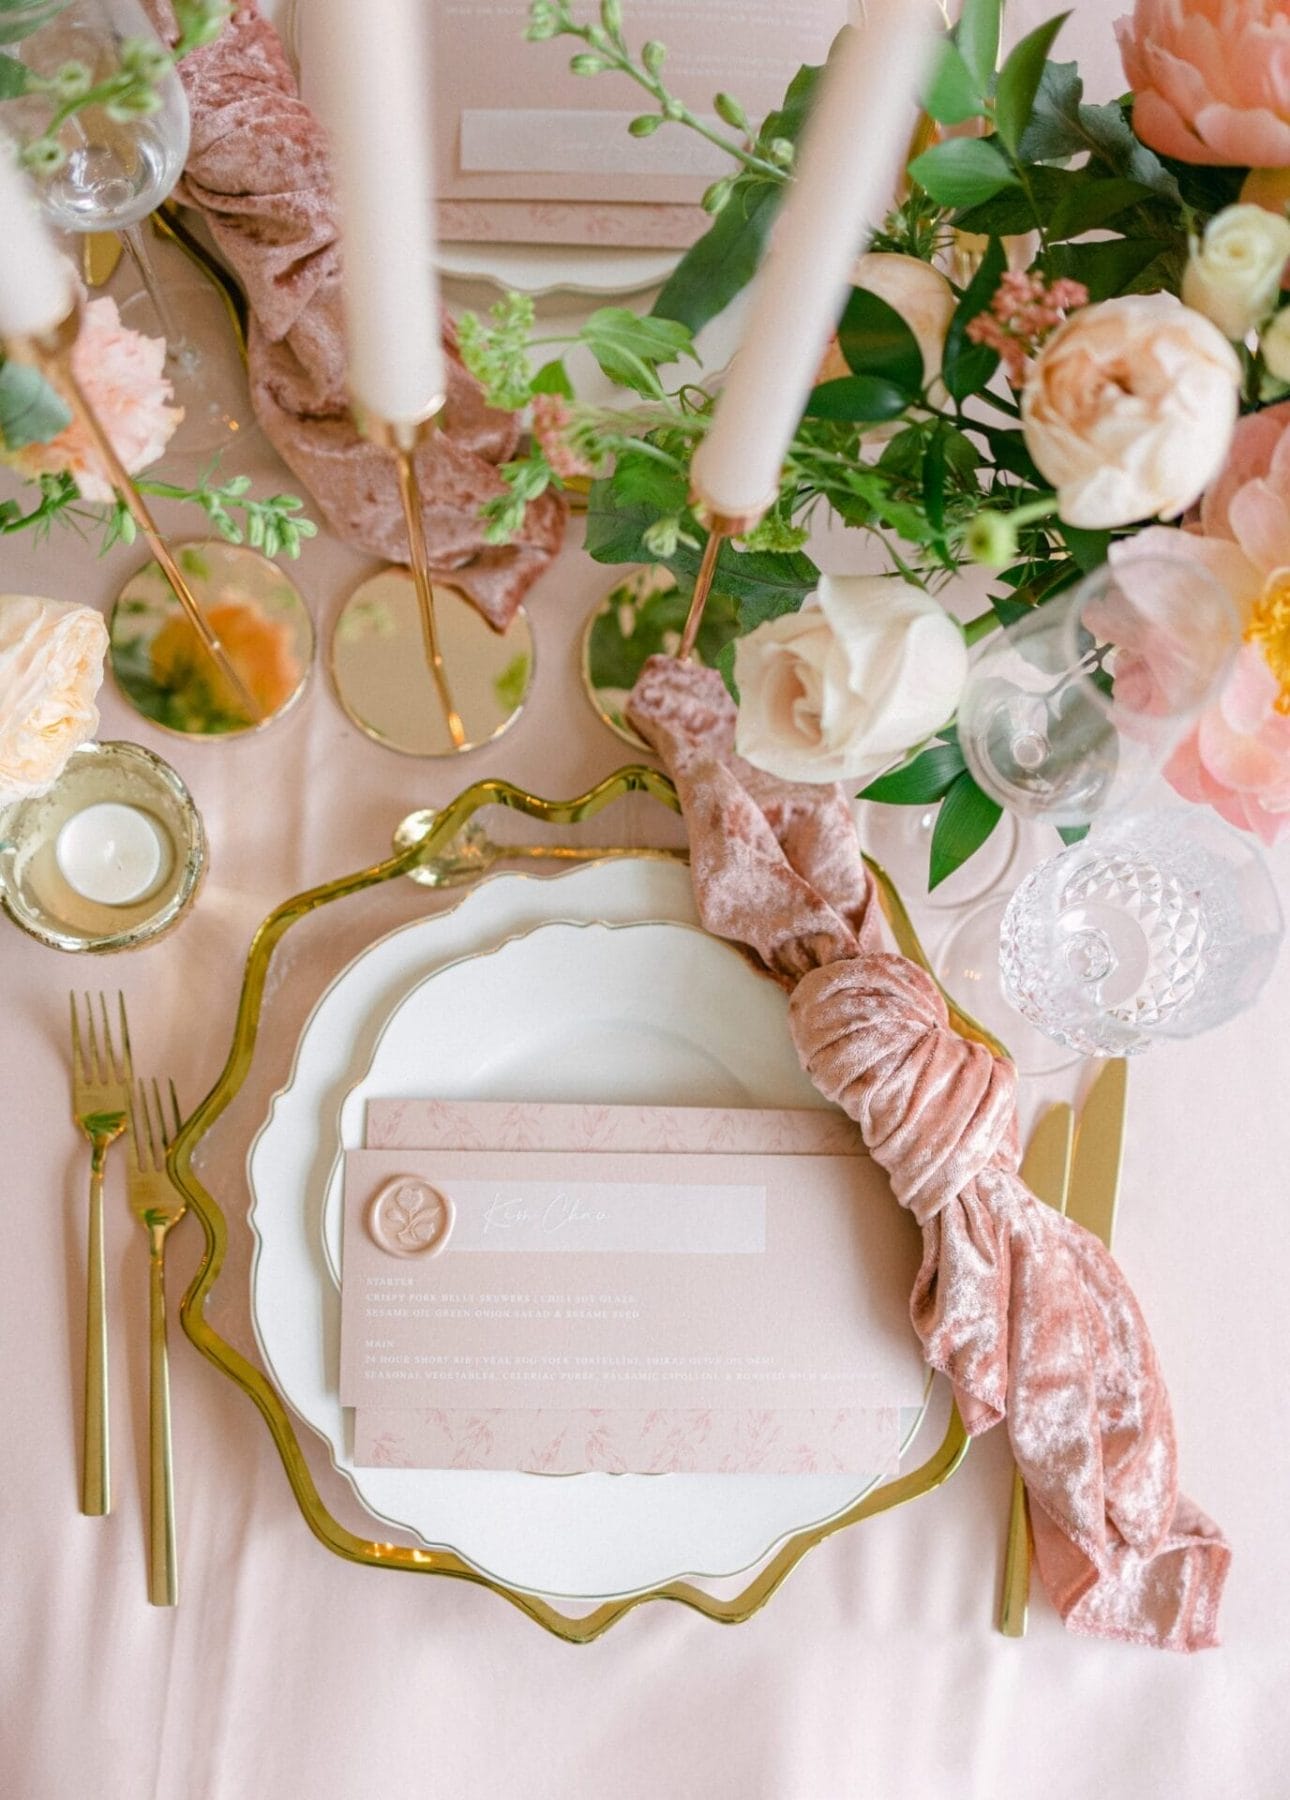 Citrus Inspired Spring Wedding Inspirstion Rocky Mountain Bride212A9786 Scaled 1